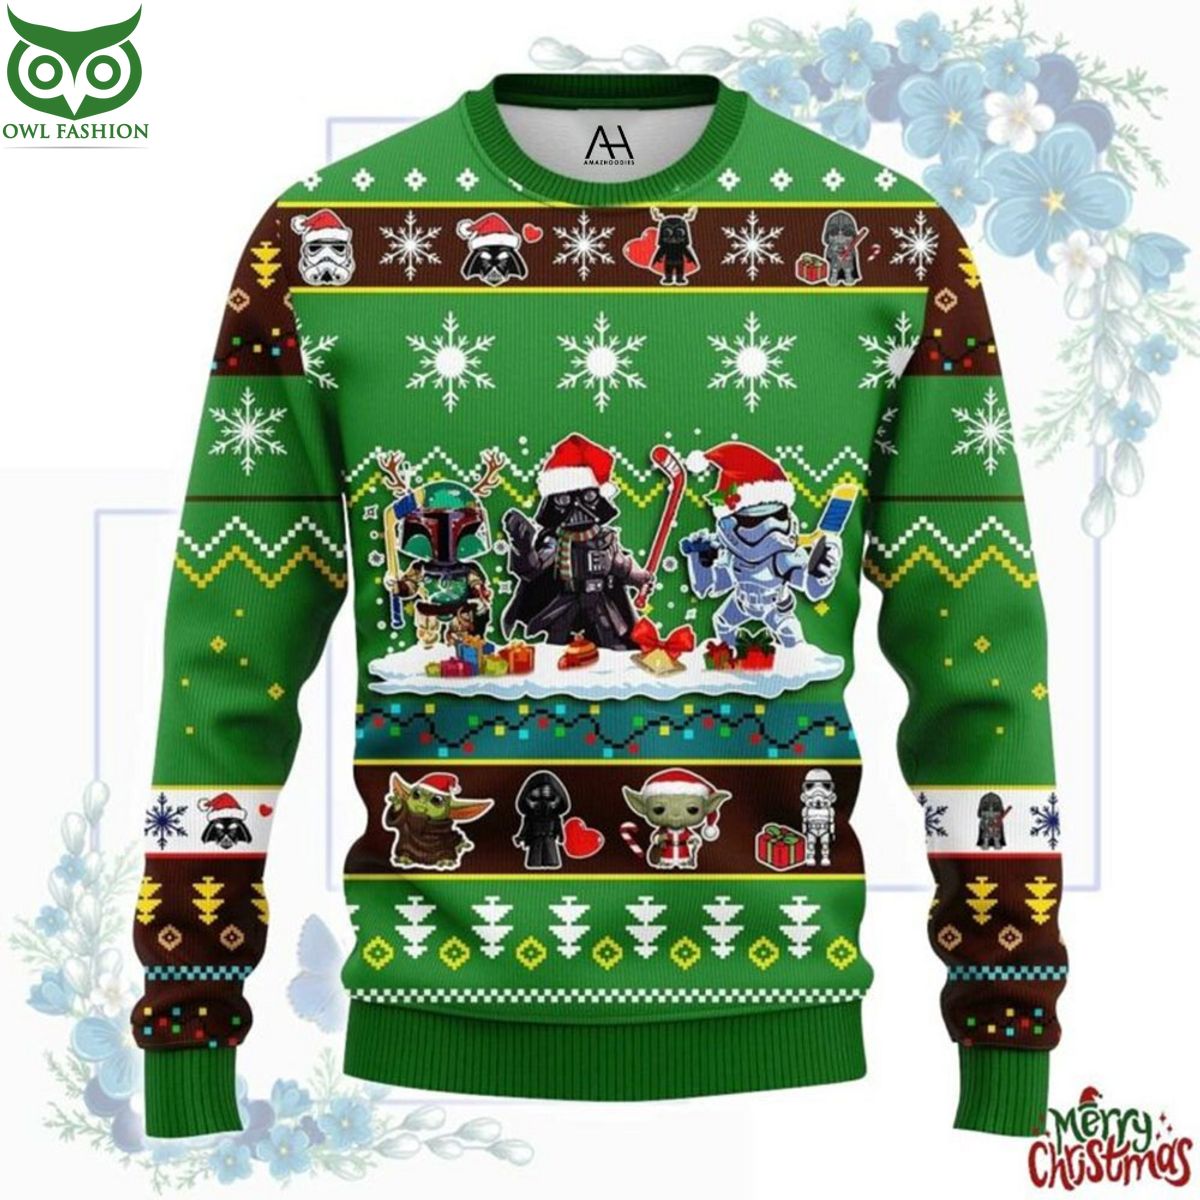 Star Wars Cute Chibi Character Ugly Christmas Sweater Jumper Looking so nice